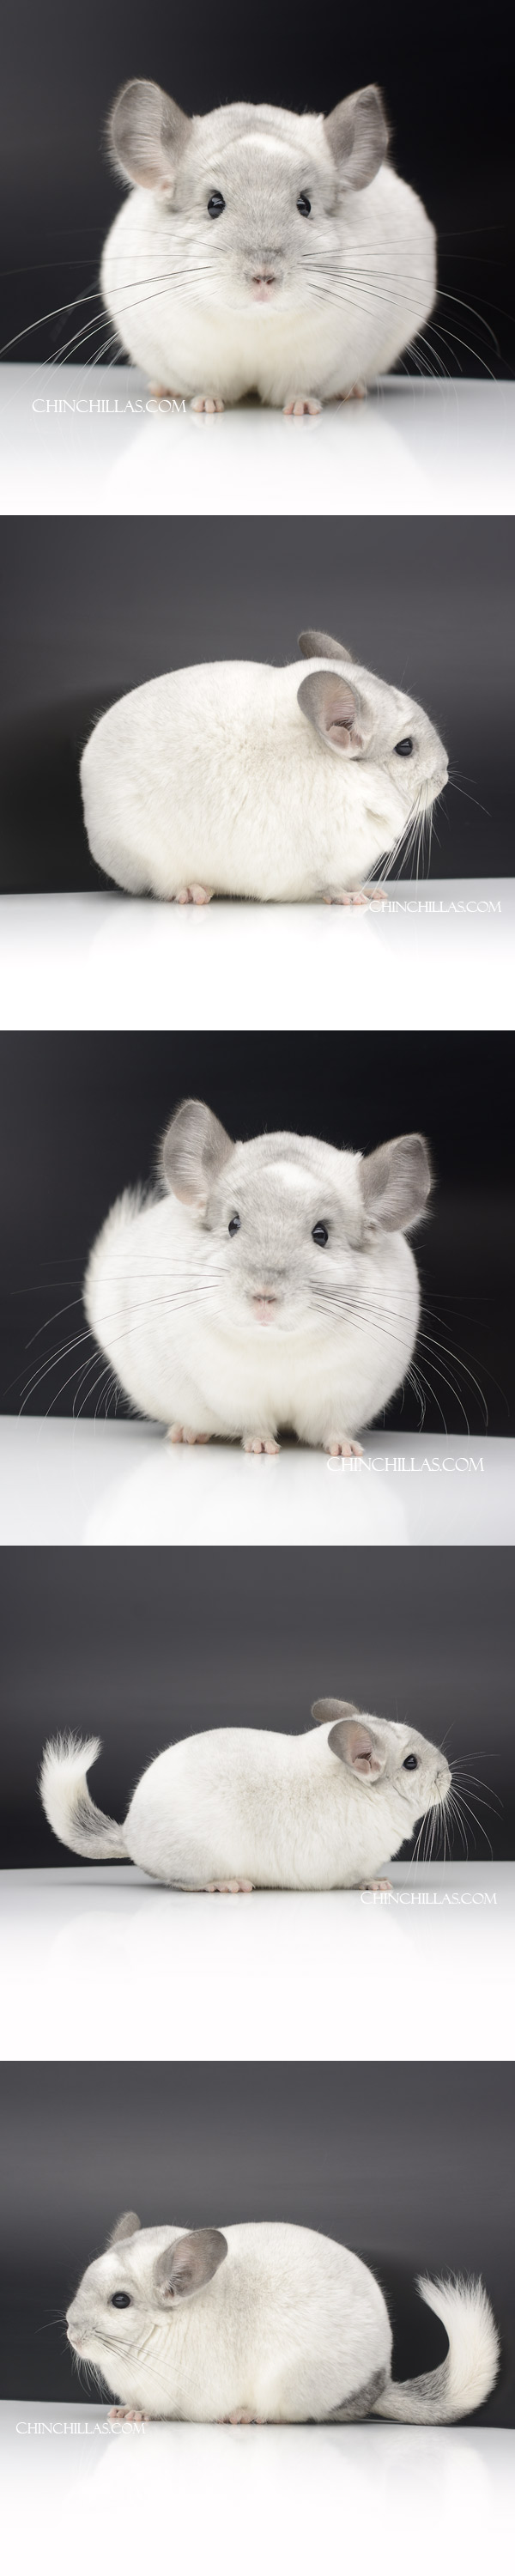 Chinchilla or related item offered for sale or export on Chinchillas.com - 000043 Blocky Show Quality White Mosaic Male Chinchilla